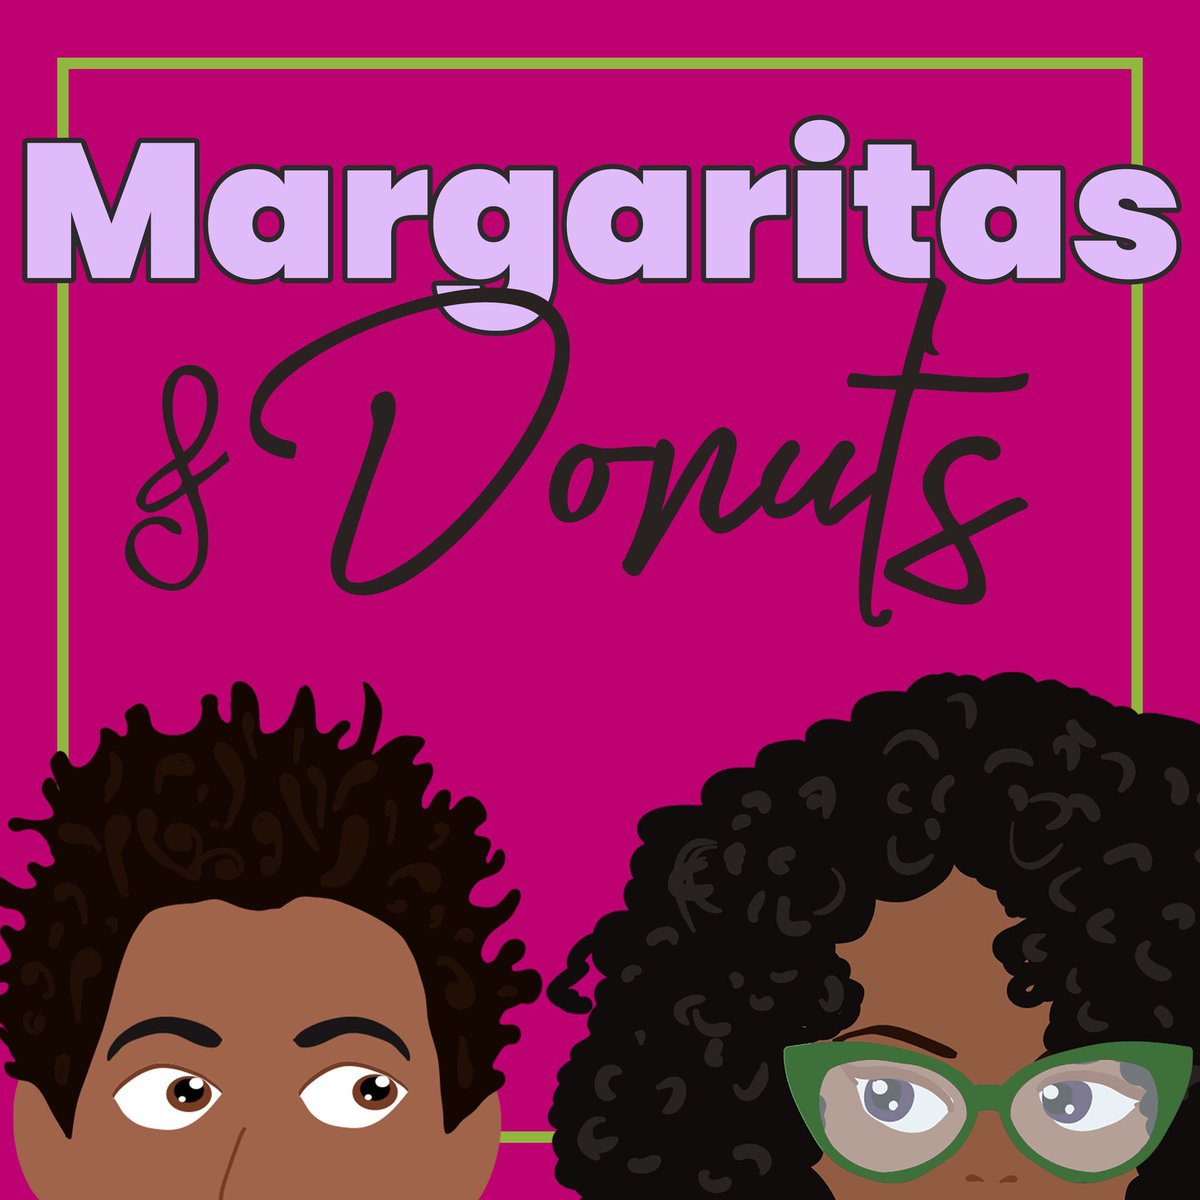 Next, to go a completely different route down into romcom land, lemme tell you about  @ObserverPix’s Margarita and Donuts!Premise: Josephine, a paediatrician with shitty dating luck stunbles into a relationship with Malik, the ophthalmologist across the hall.